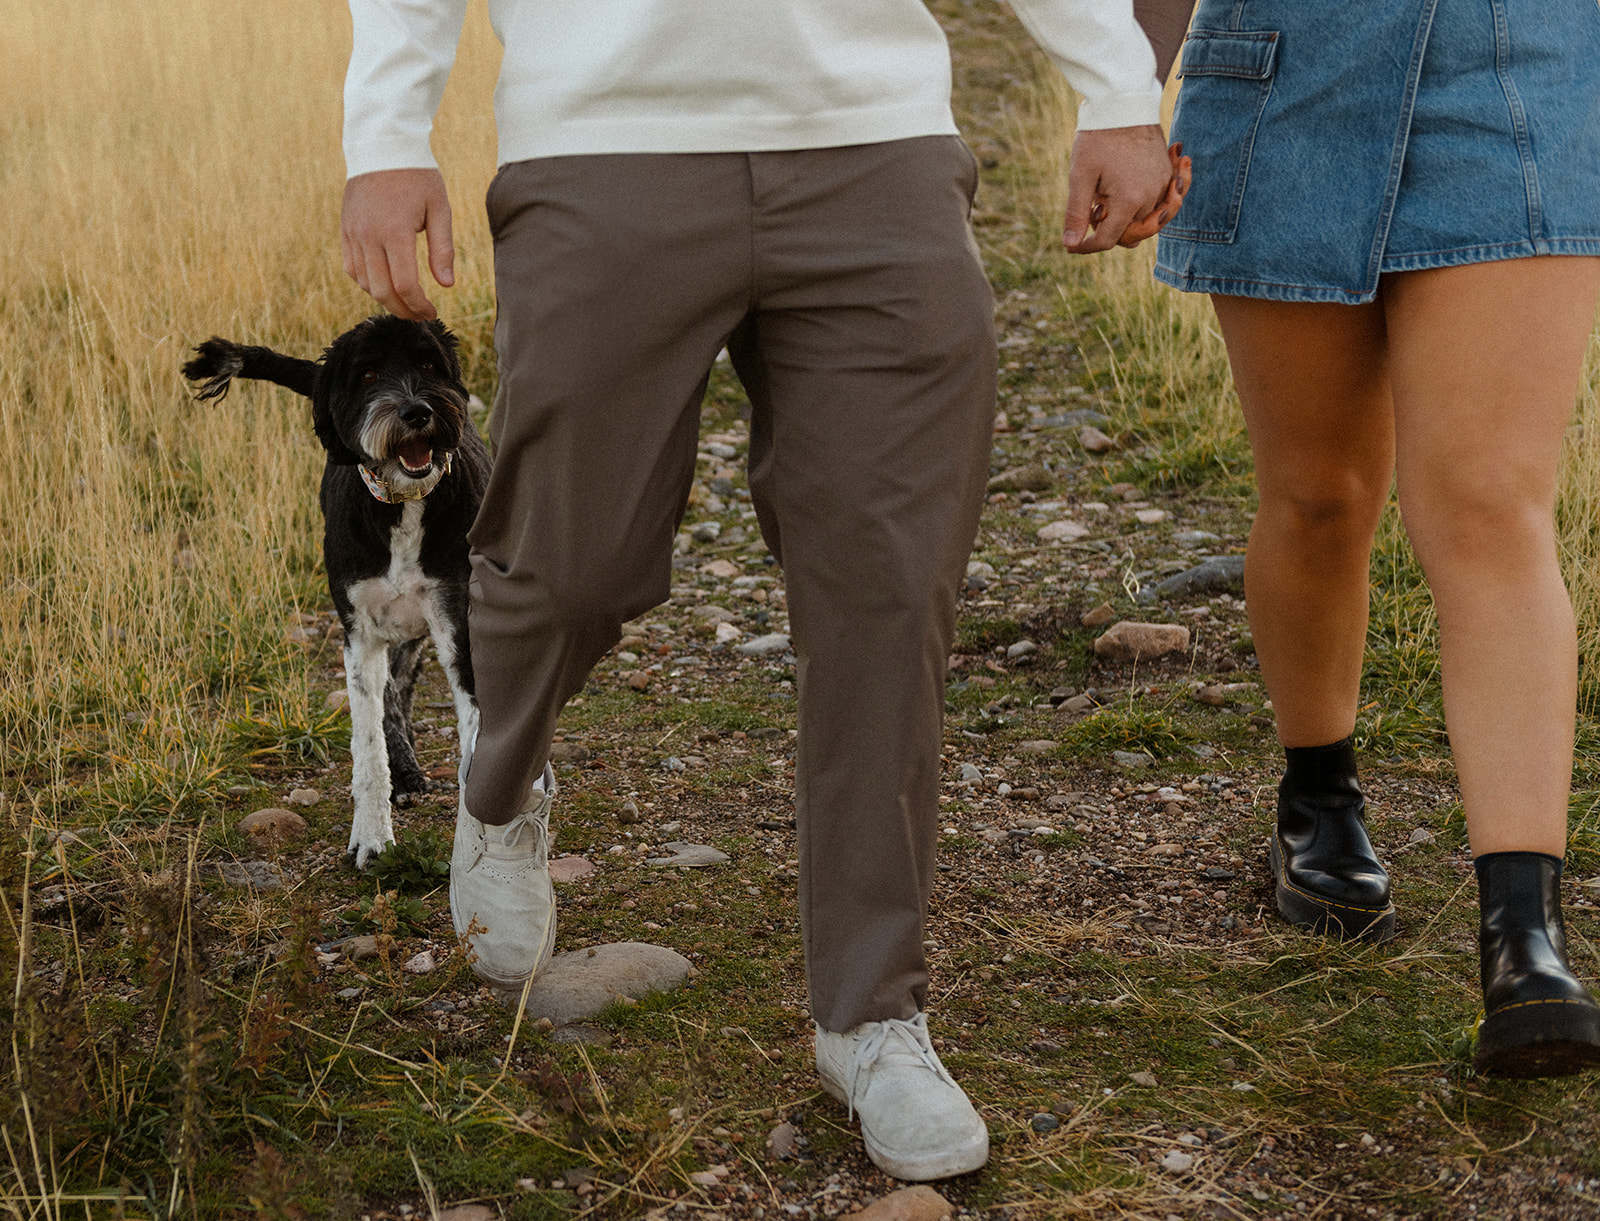 Couples session with their dog at Tunnel Springs Park in Salt Lake City, Utah 